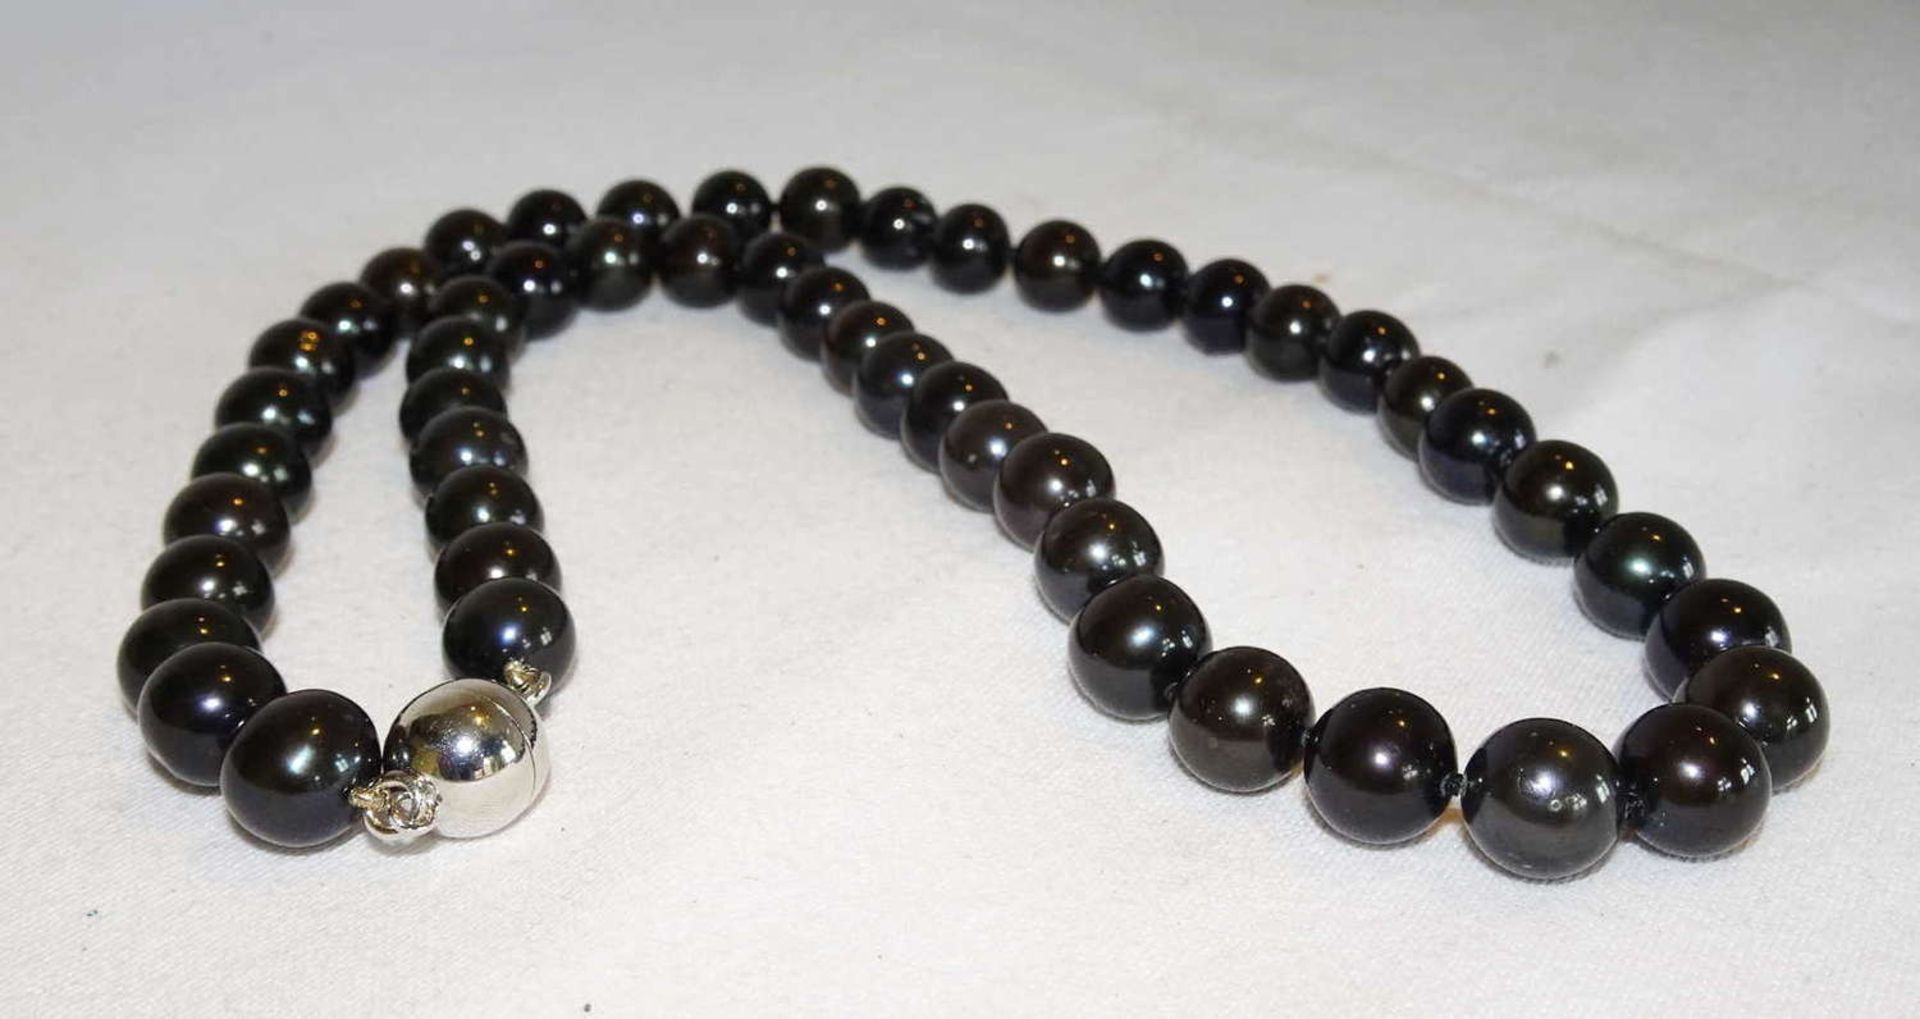 Real pearl necklace, iridescent. With magnetic closure. Length about 50 cm